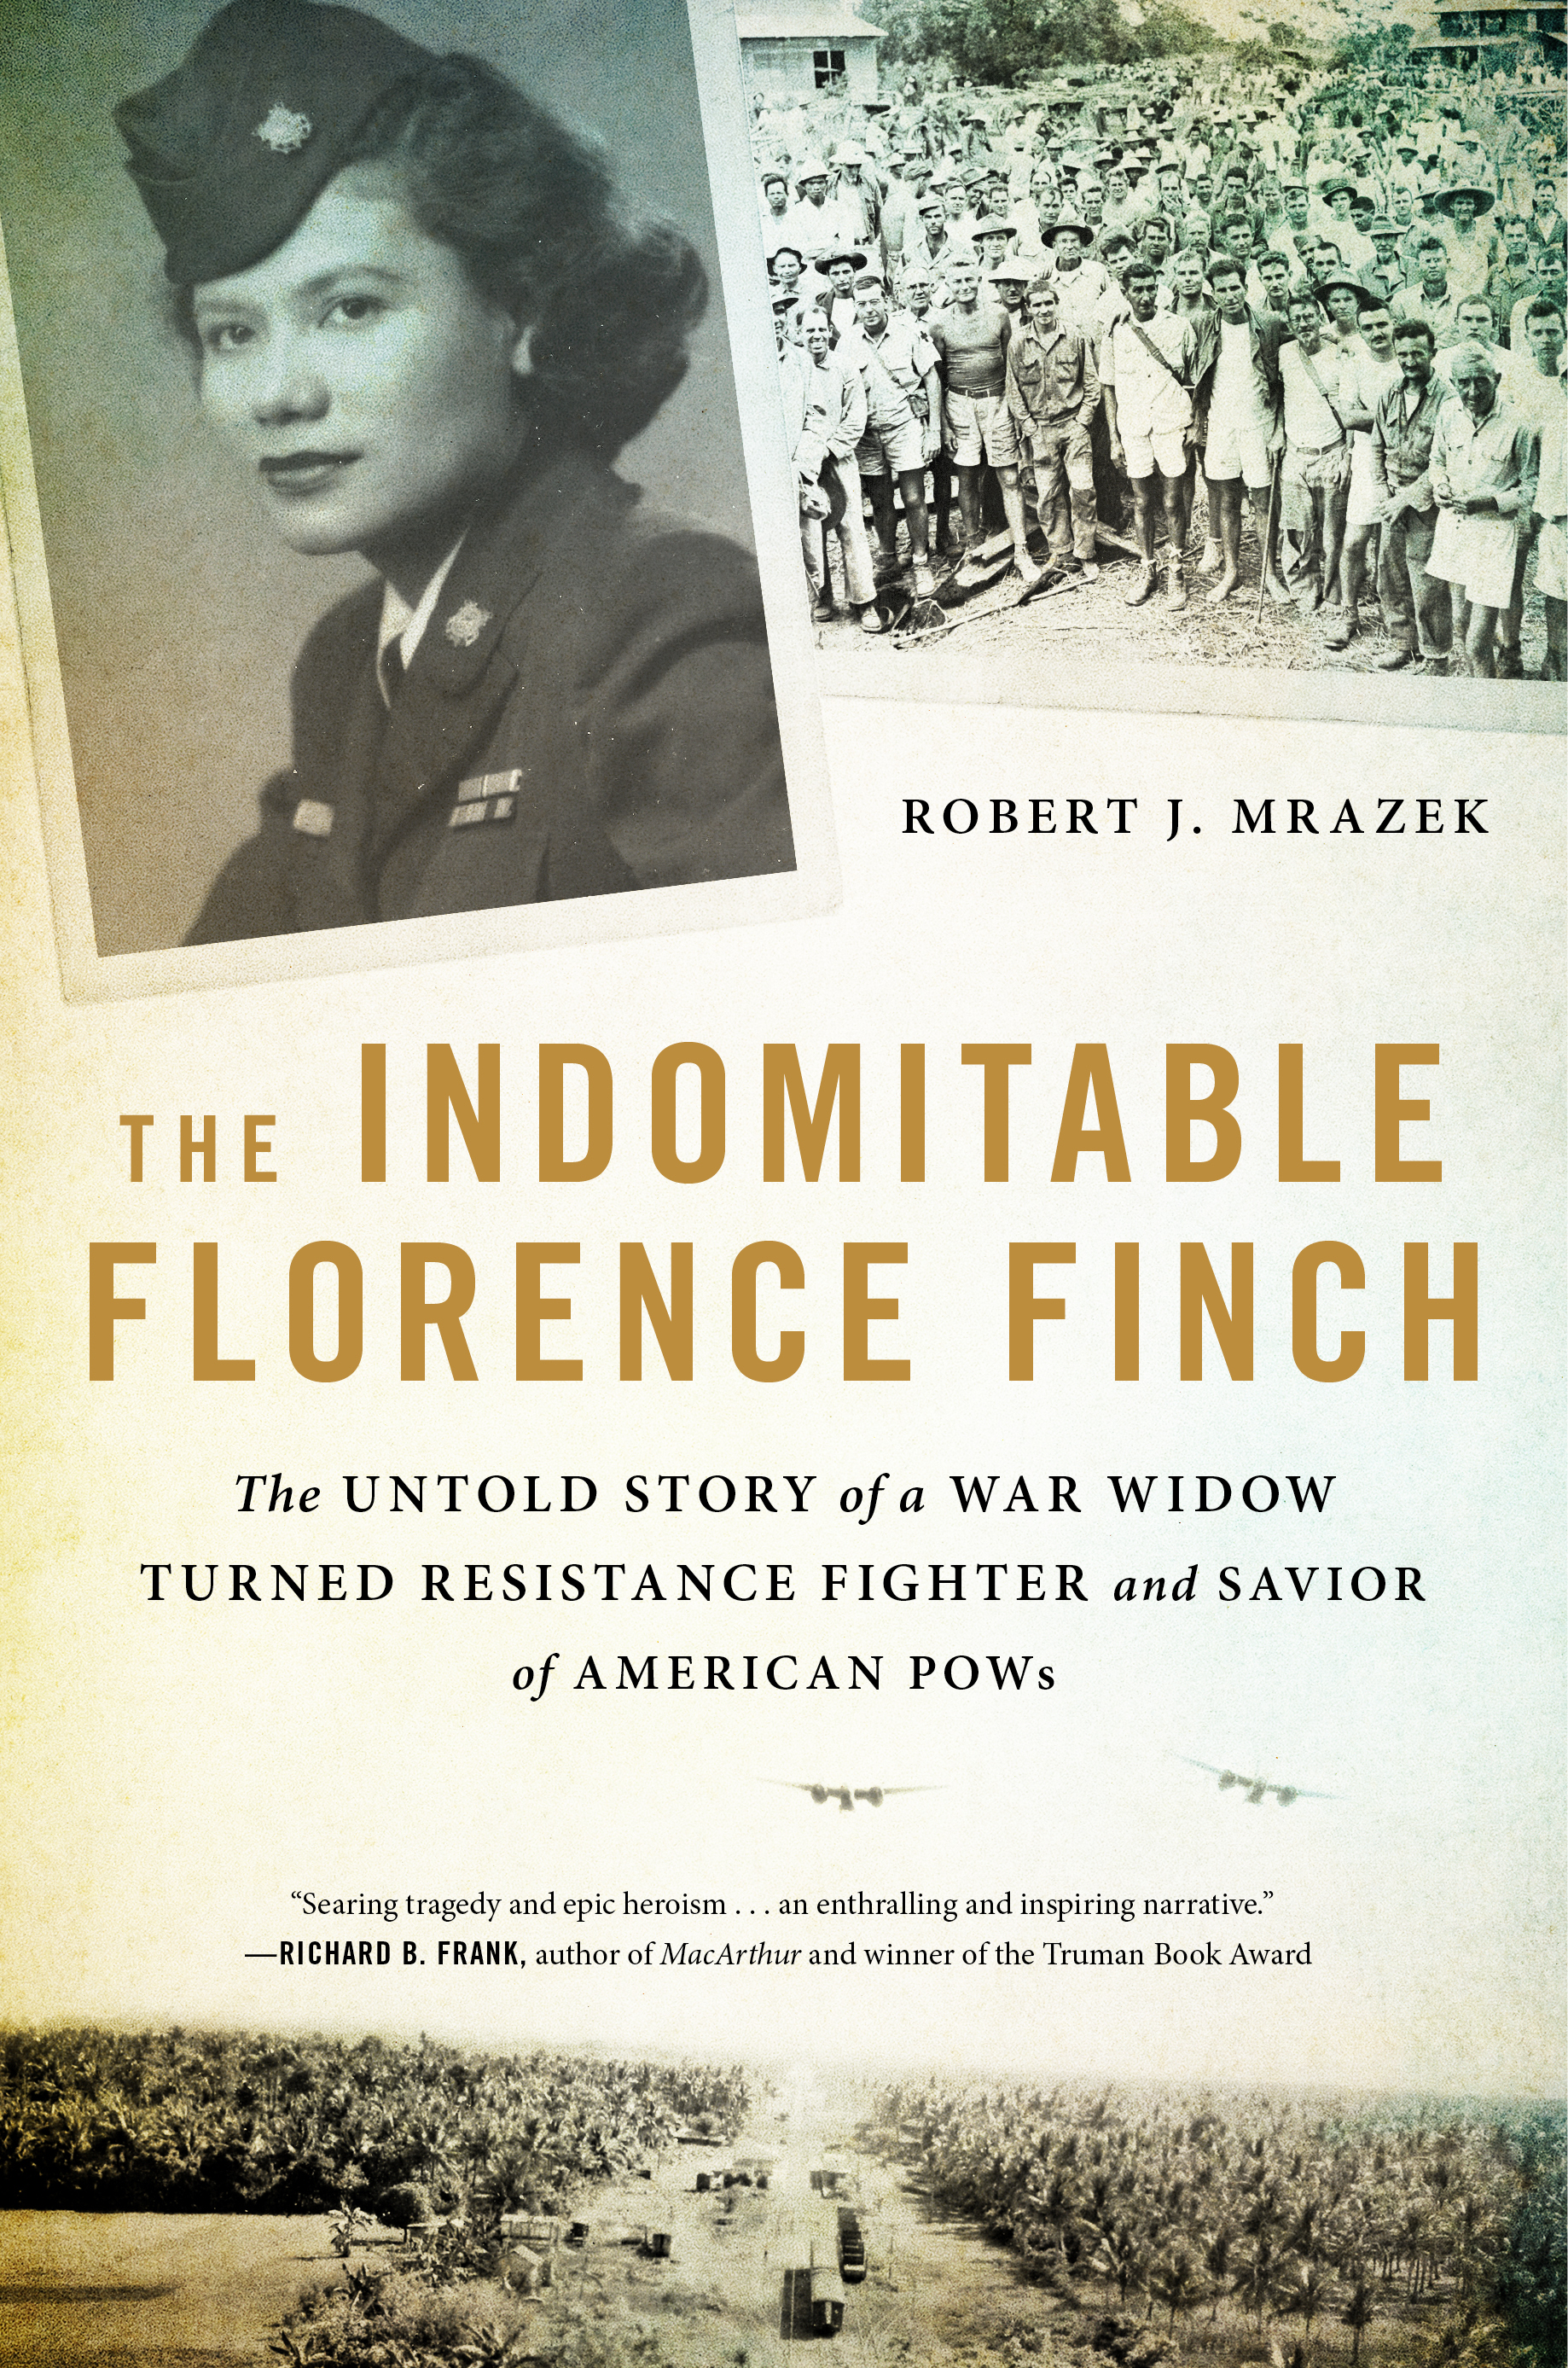 THE INDOMITABLE FLORENCE FINCH by Robert Mrazek